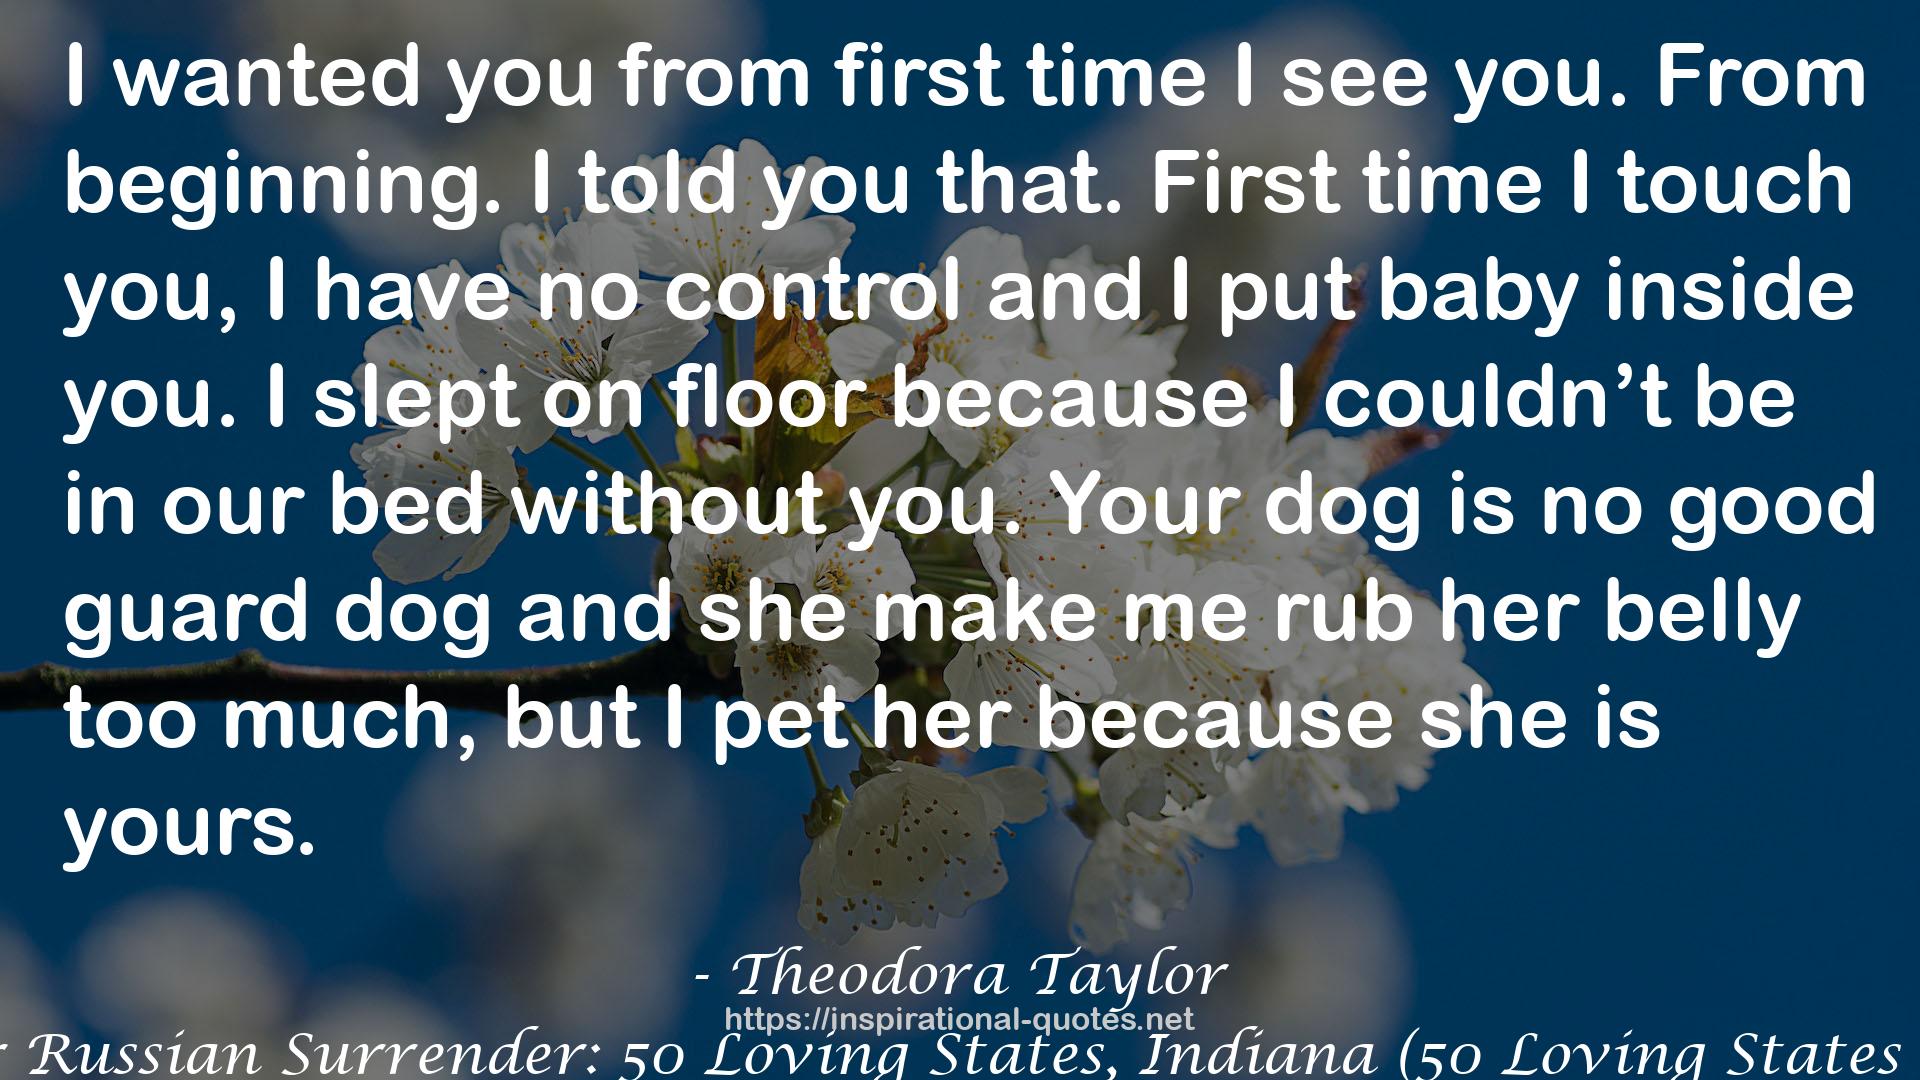 Her Russian Surrender: 50 Loving States, Indiana (50 Loving States #10) QUOTES